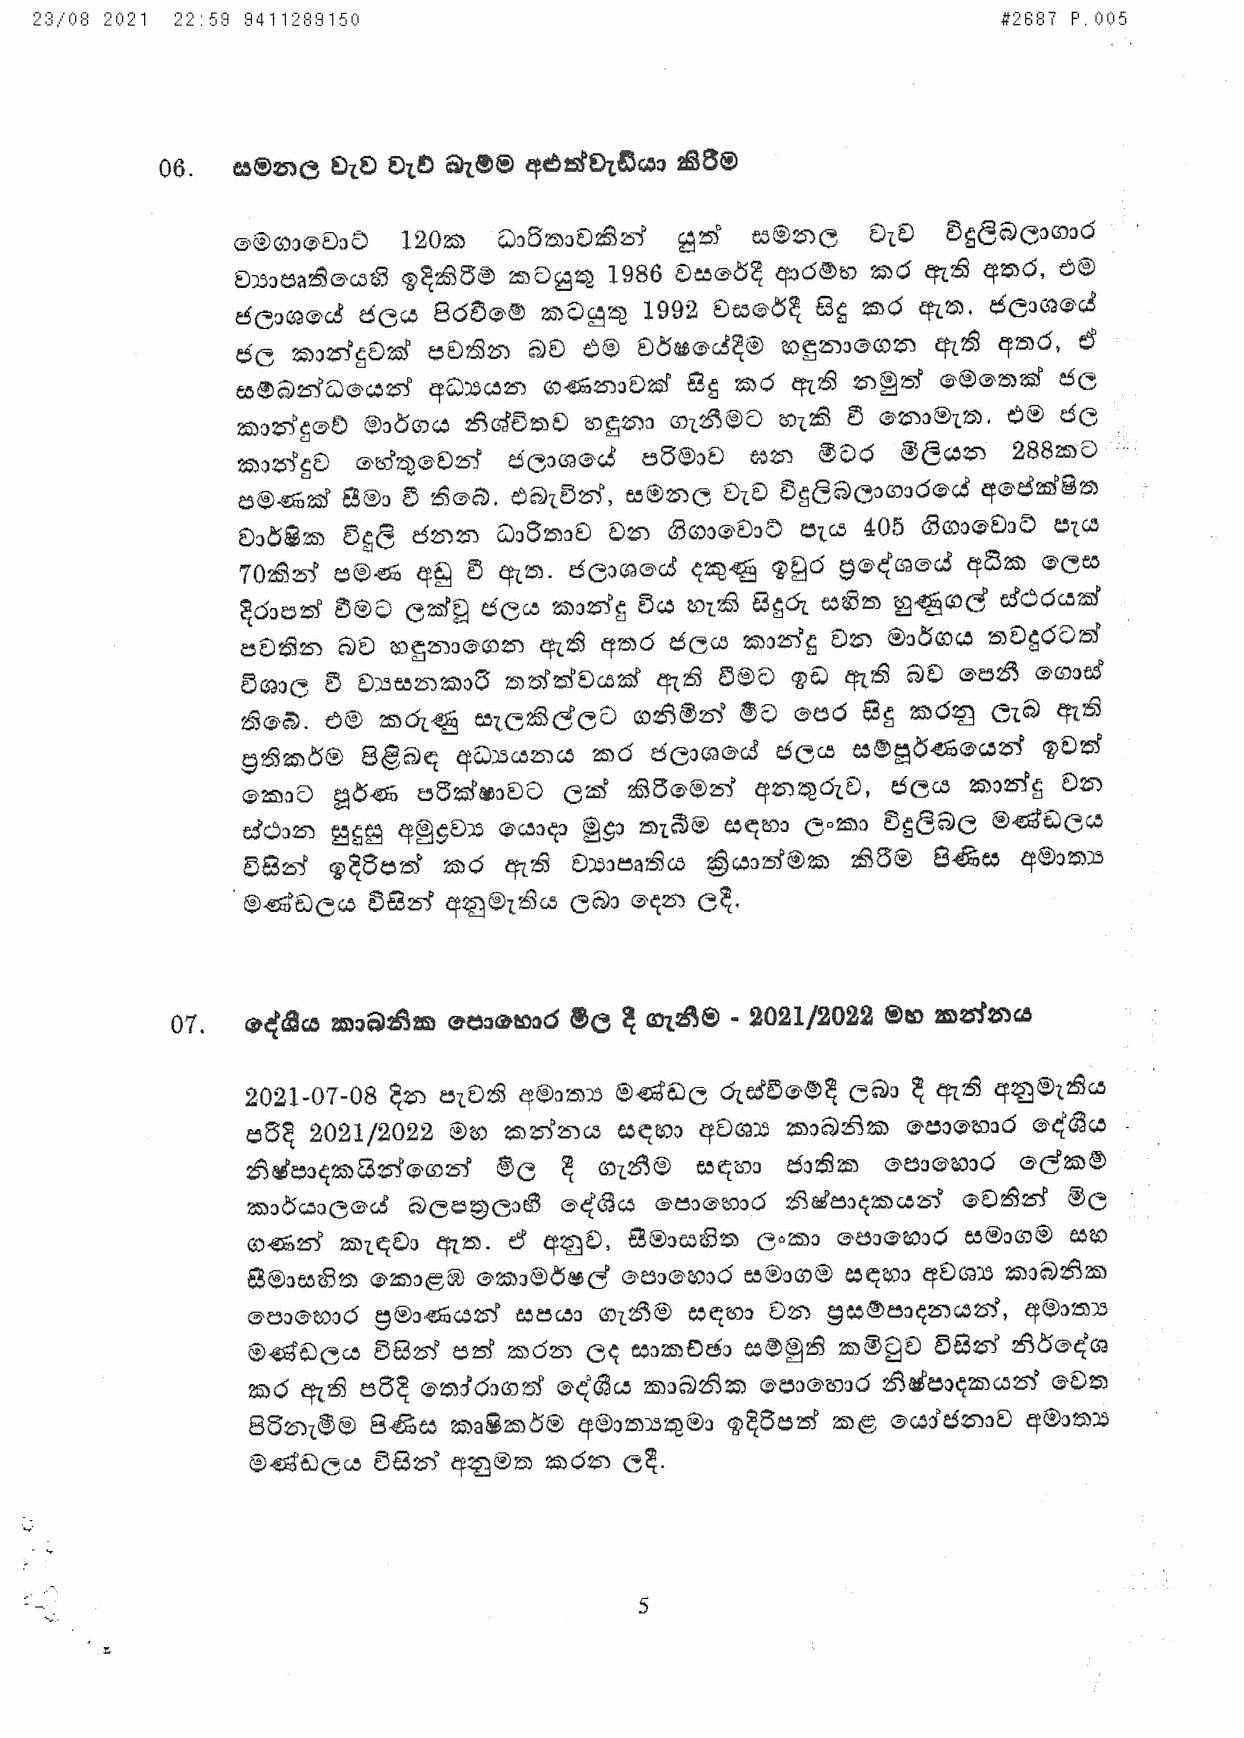 Cabinet Decision on 23.08.2021 page 005